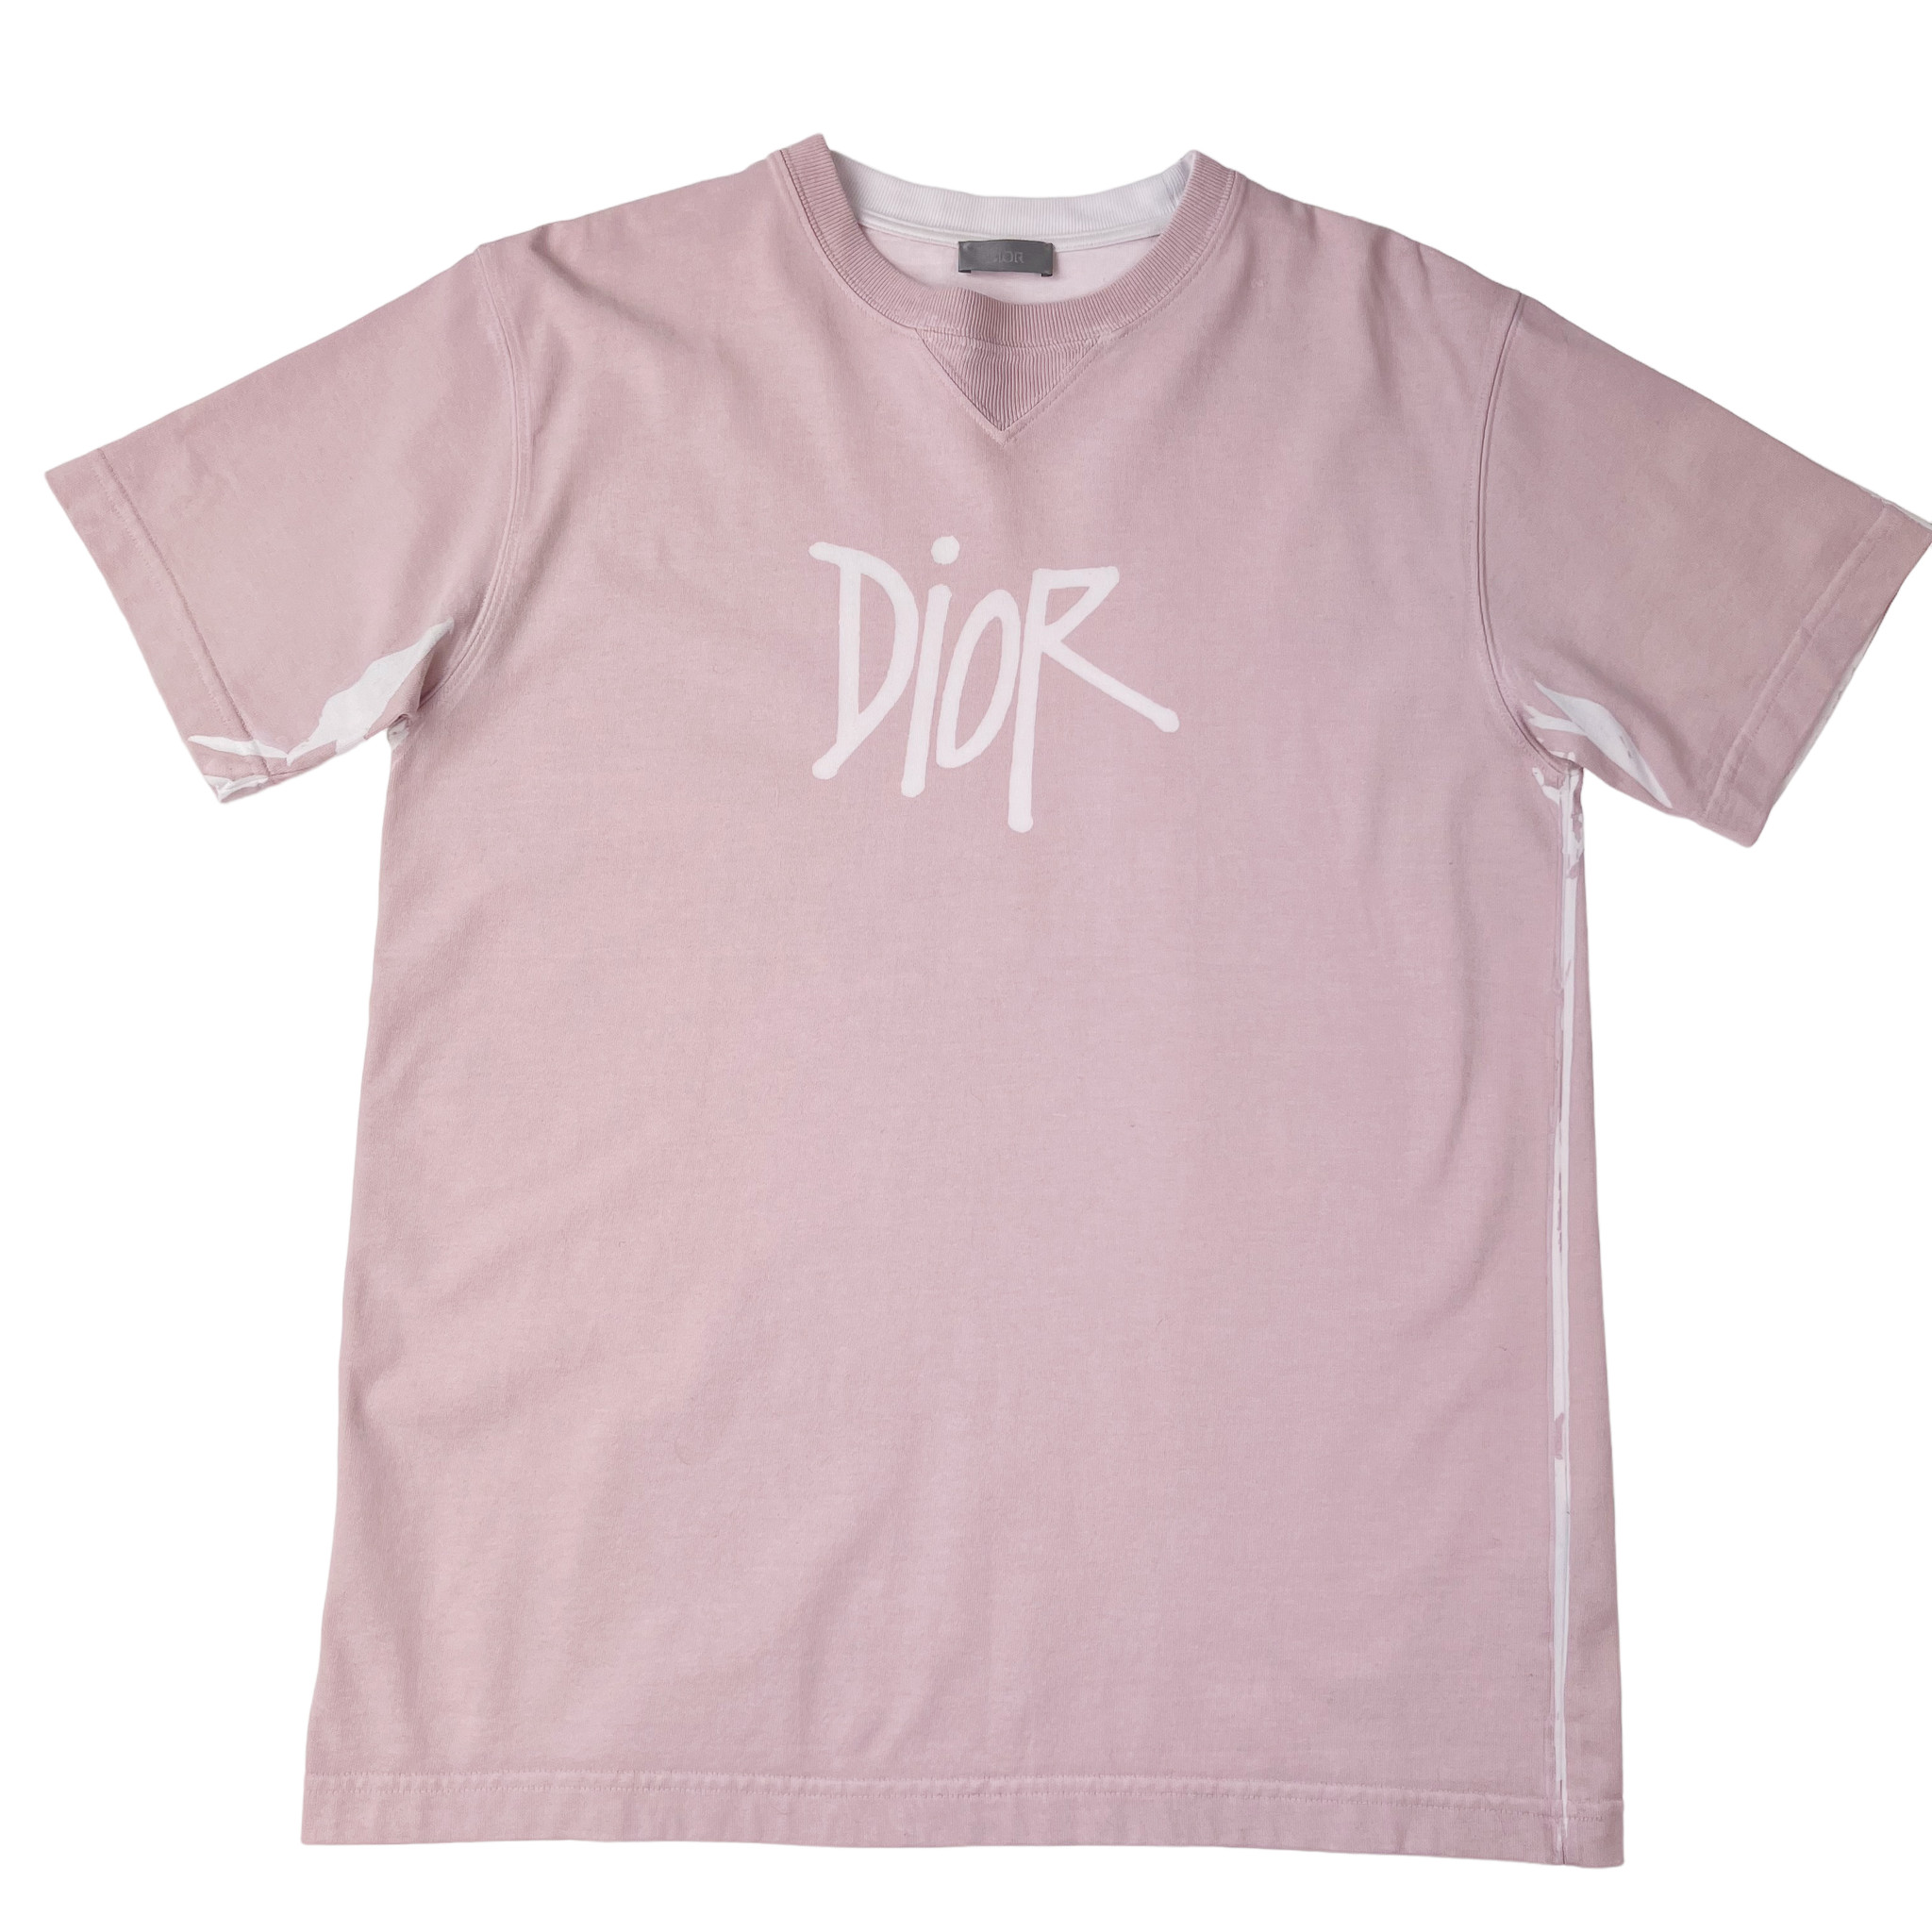 Dior x Shawn Stussy Garment Dyed Pink T Shirt - Oliver's Archive